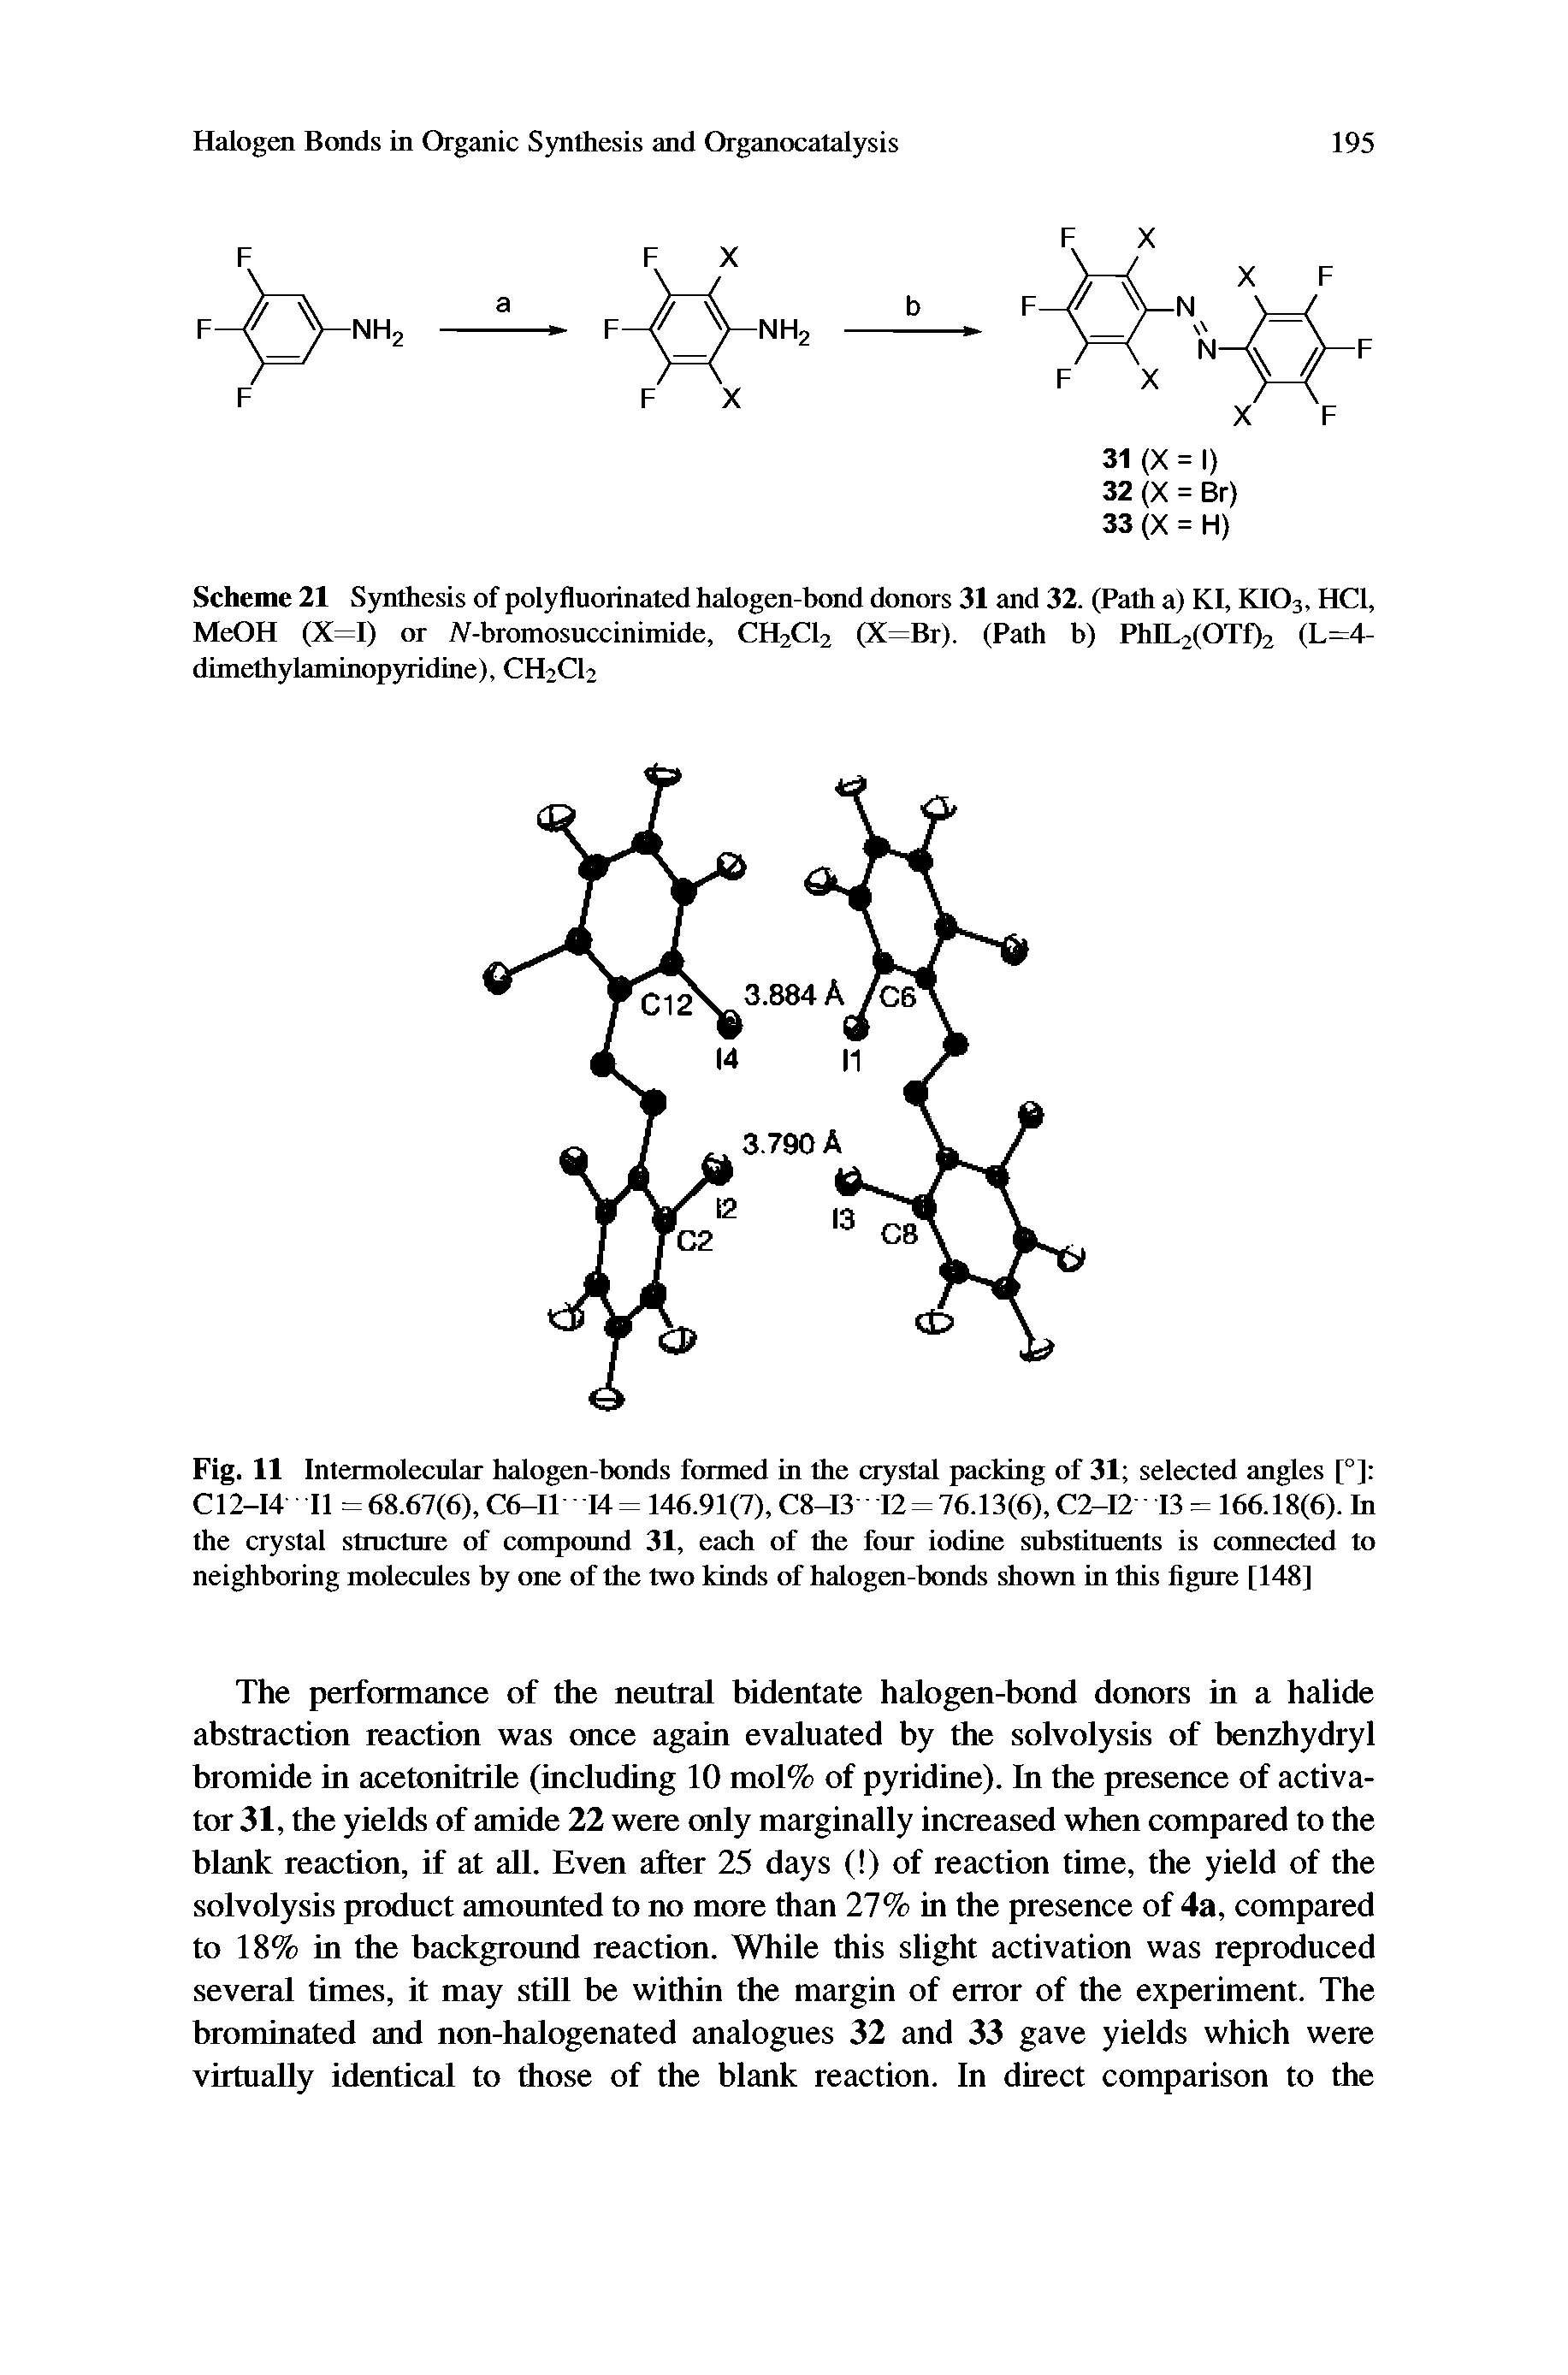 Fig. 11 Intermolecular halogen-bonds formed in the crystal packing of 31 selected angles [ ] C12-14 11 = 68.67(6), C6-I1 - M = 146.91(7), C8-13 12 = 76.13(6), C2-I2 13 = 166.18(6). In the crystal stmcture of compound 31, each of the four iodine substituraits is connected to neighboring molecules by one of the two kinds of halogen-bonds shown in this figure [148]...